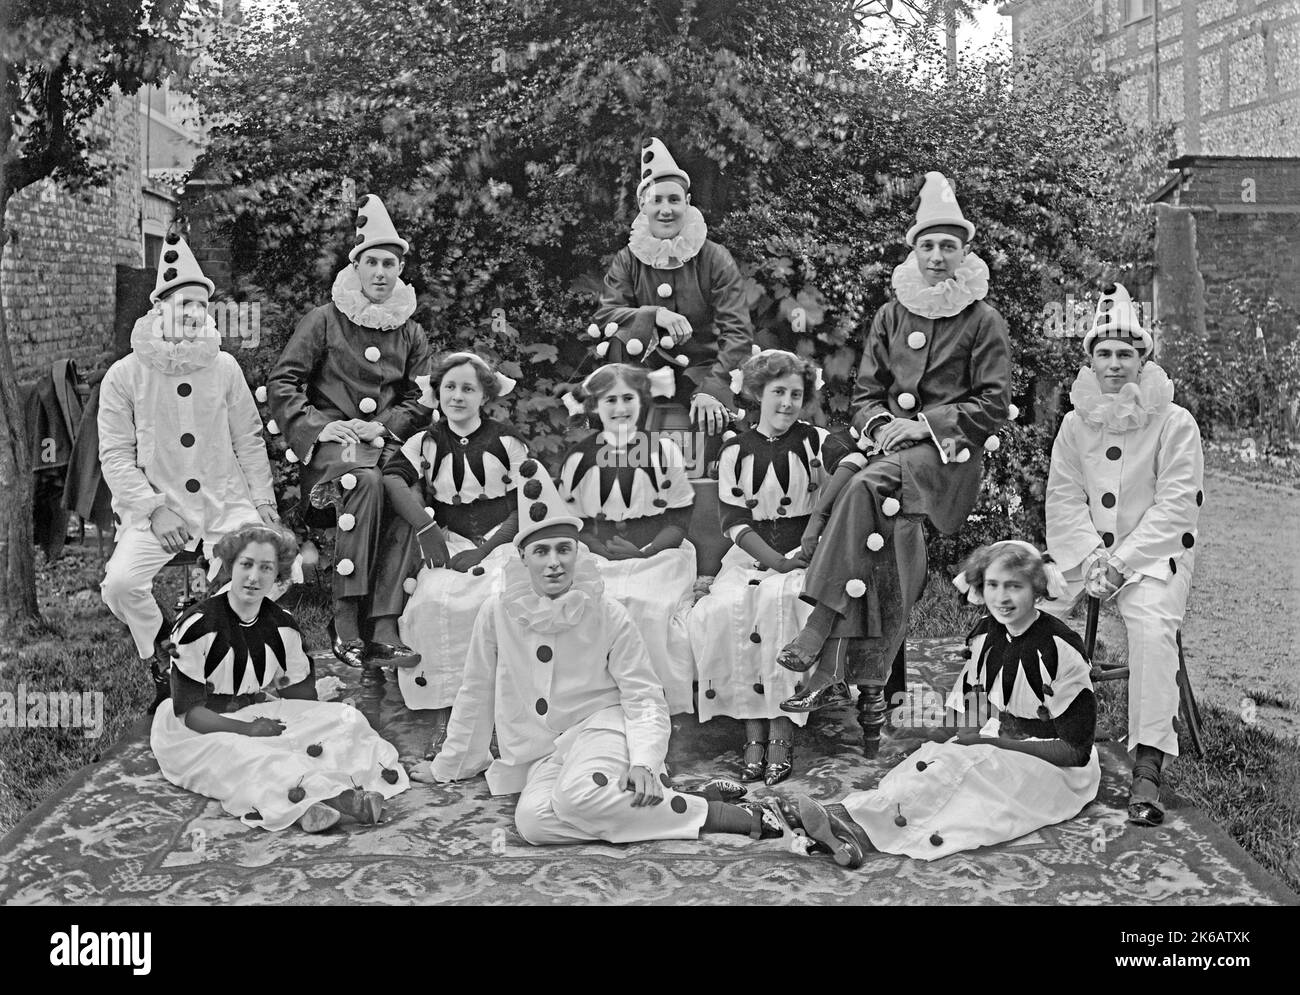 A group of men and women wearing Pierrot (clown) costumes, Norfolk, England, UK c. 1930. A Pierrot is a character of pantomime and commedia dell’arte, whose origins are in the late seventeenth-century Italian troupe of players performing in Paris and known as the Comédie-Italienne. This is taken from an old black and white negative – a vintage 1920s/30s photograph. Stock Photo